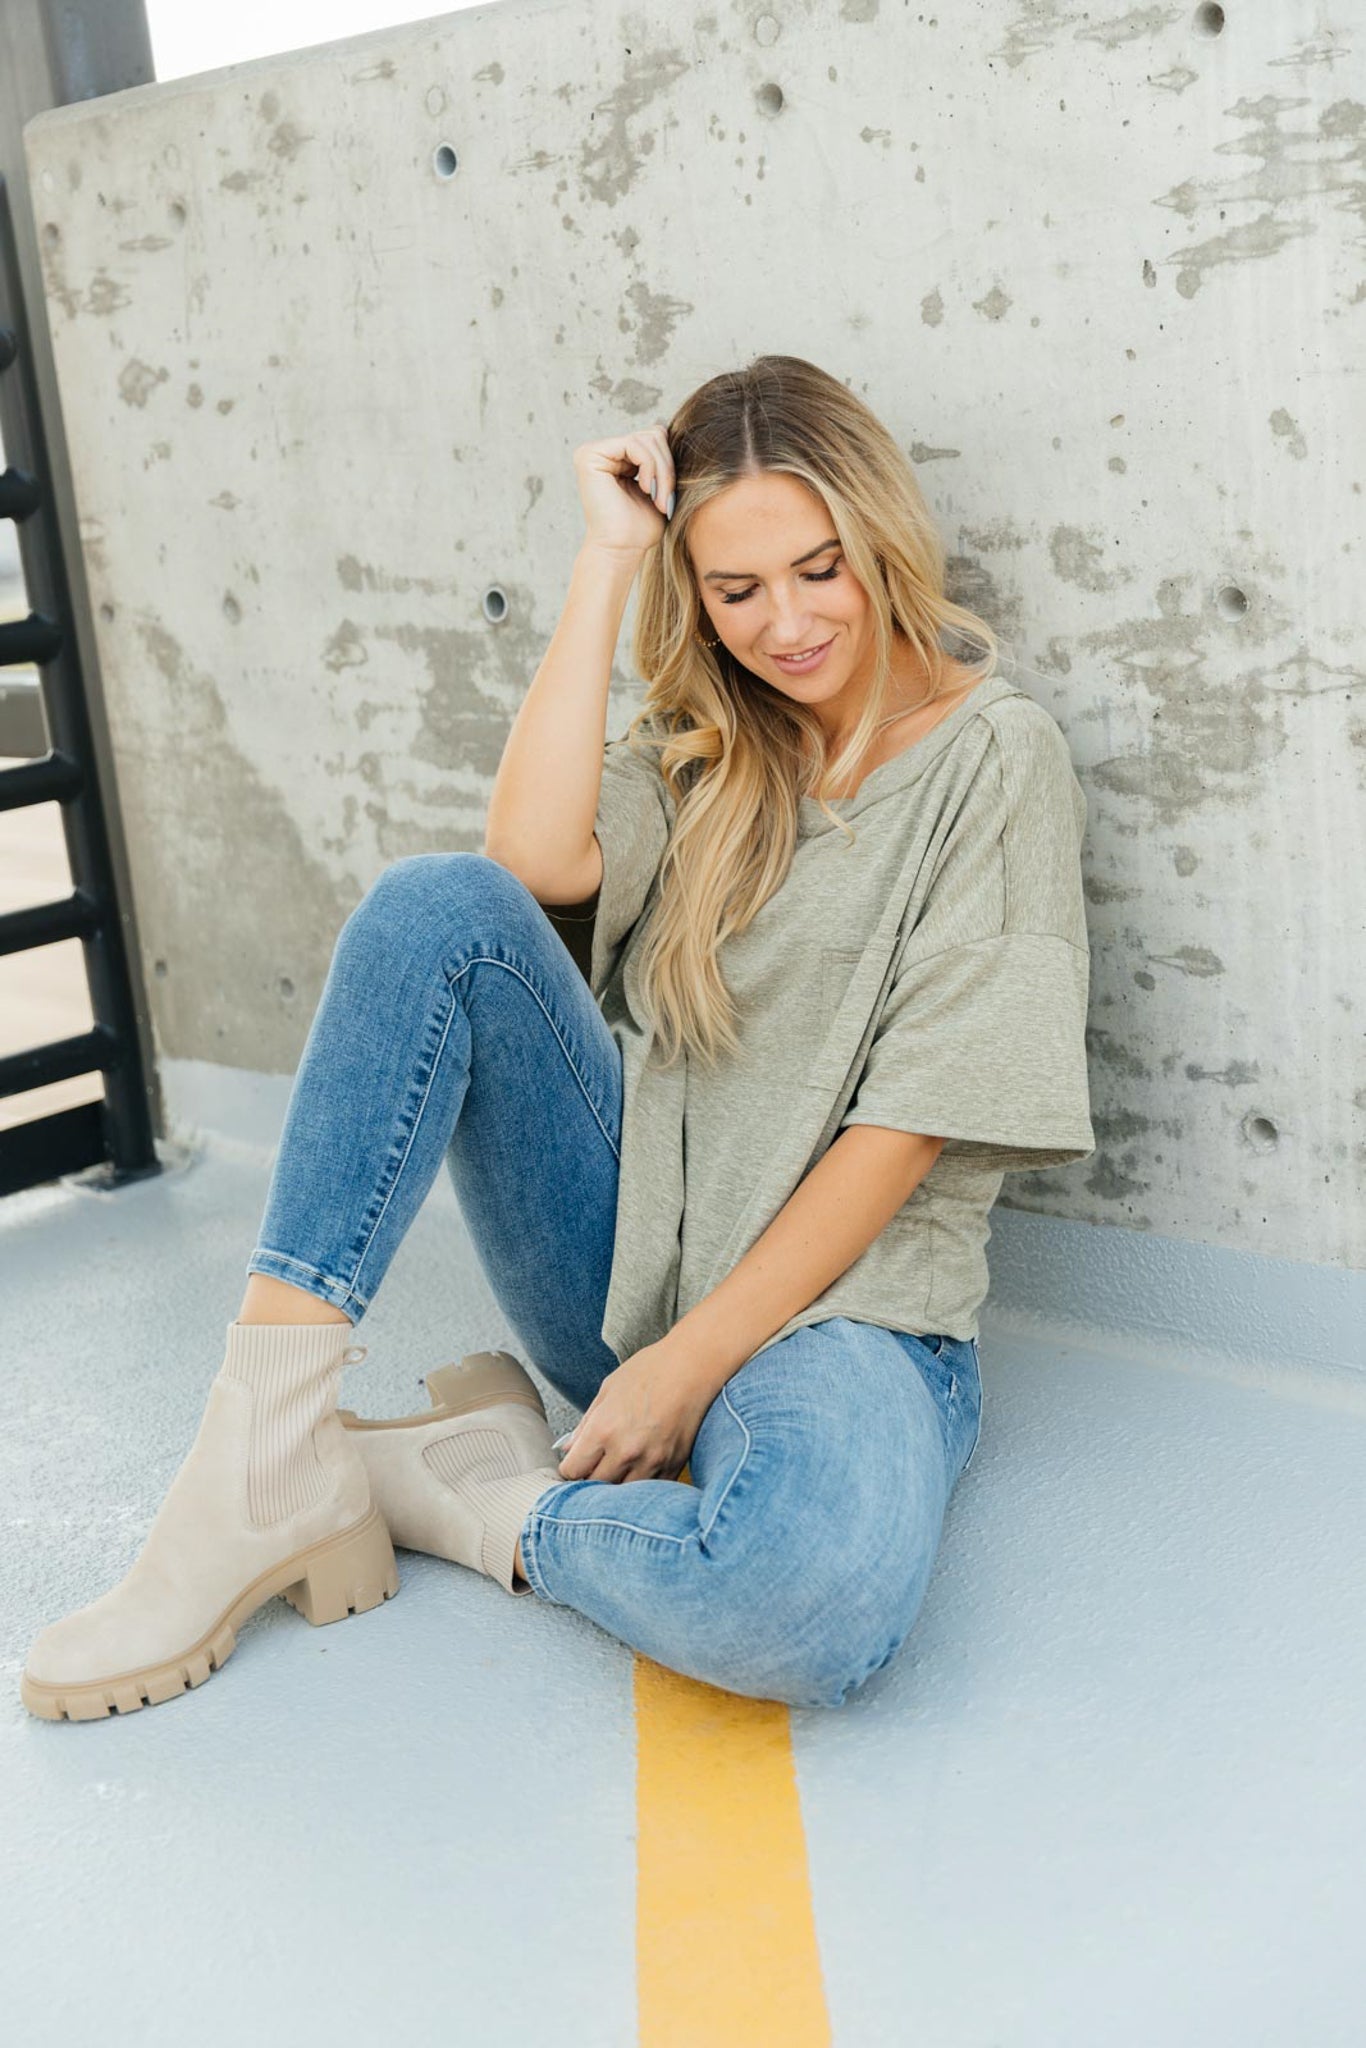 Hannah Tee in Faded Olive